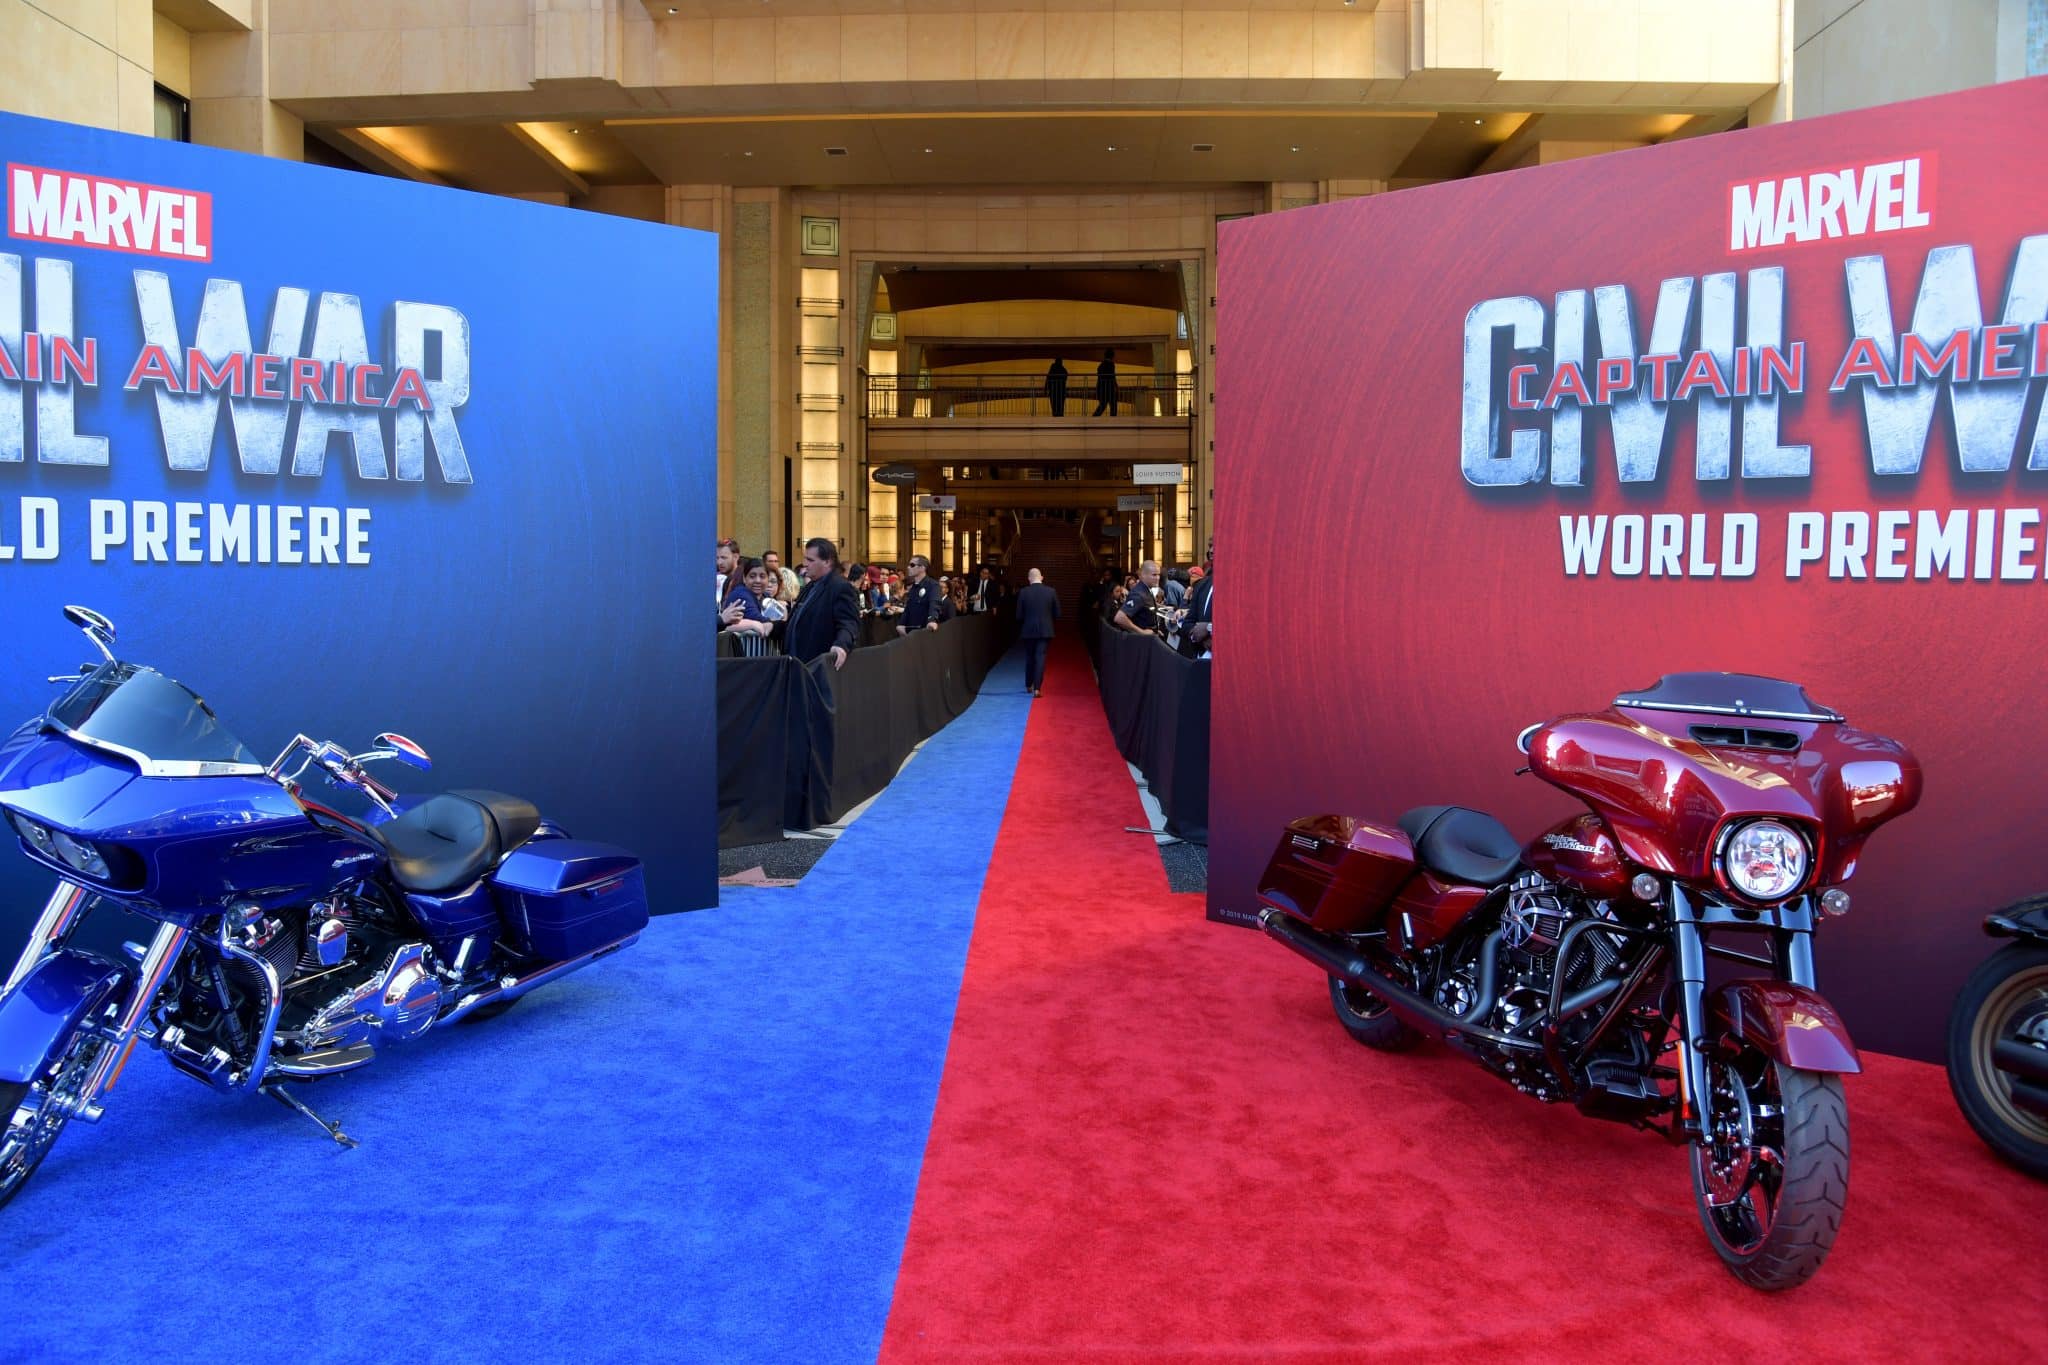 HOLLYWOOD, CALIFORNIA - APRIL 12: Signage and displays are seen during The World Premiere of Marvel's "Captain America: Civil War" at Dolby Theatre on April 12, 2016 in Los Angeles, California. (Photo by Lester Cohen/Getty Images for Disney)